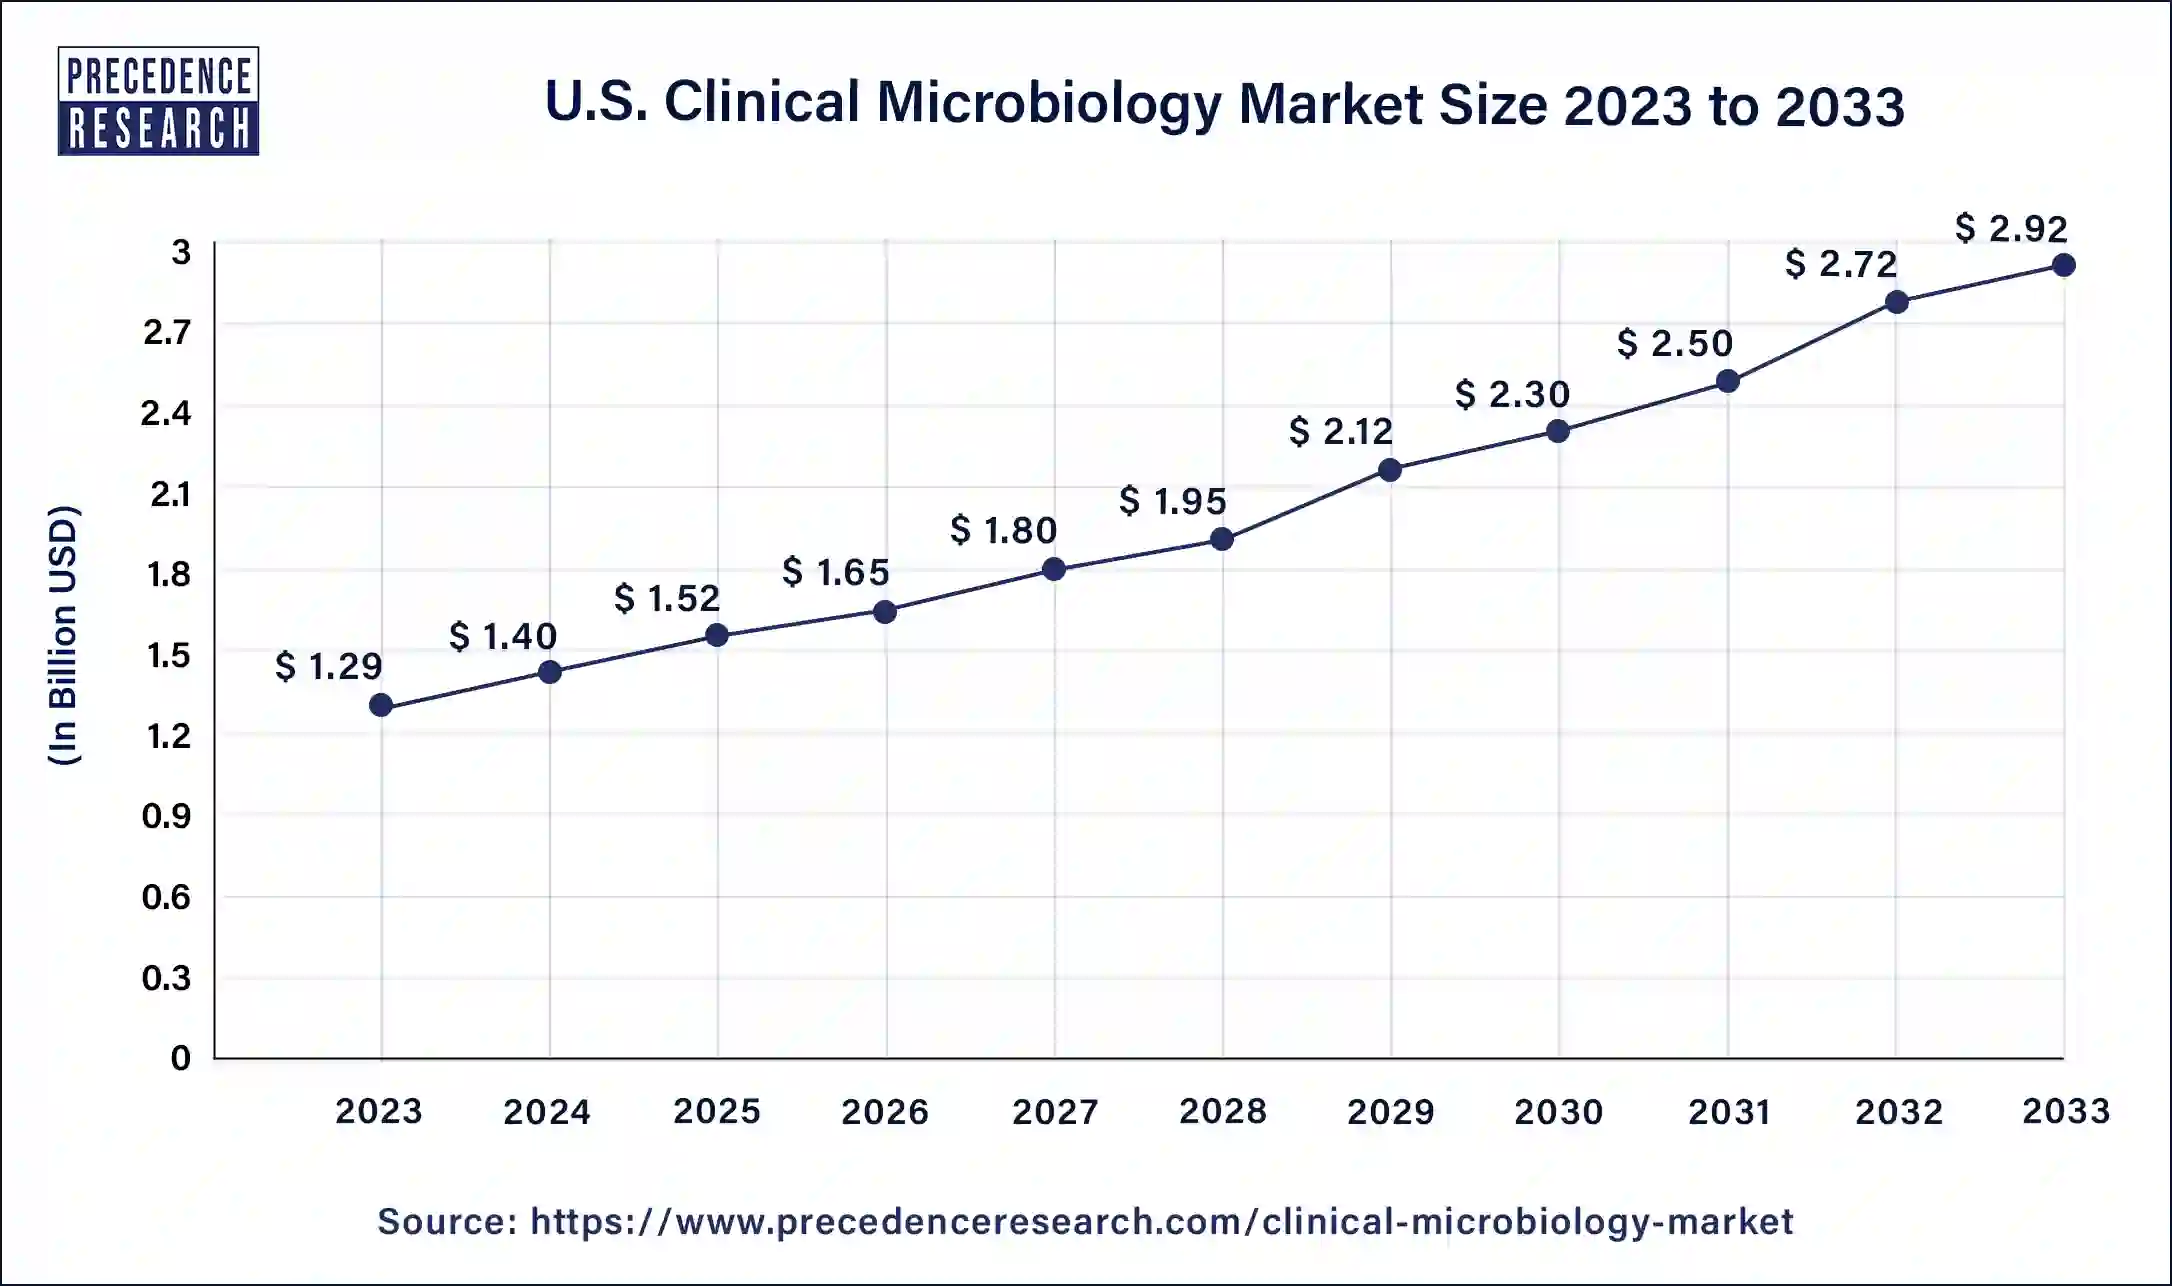 U.S. Clinical Microbiology Market Size 2024 to 2033